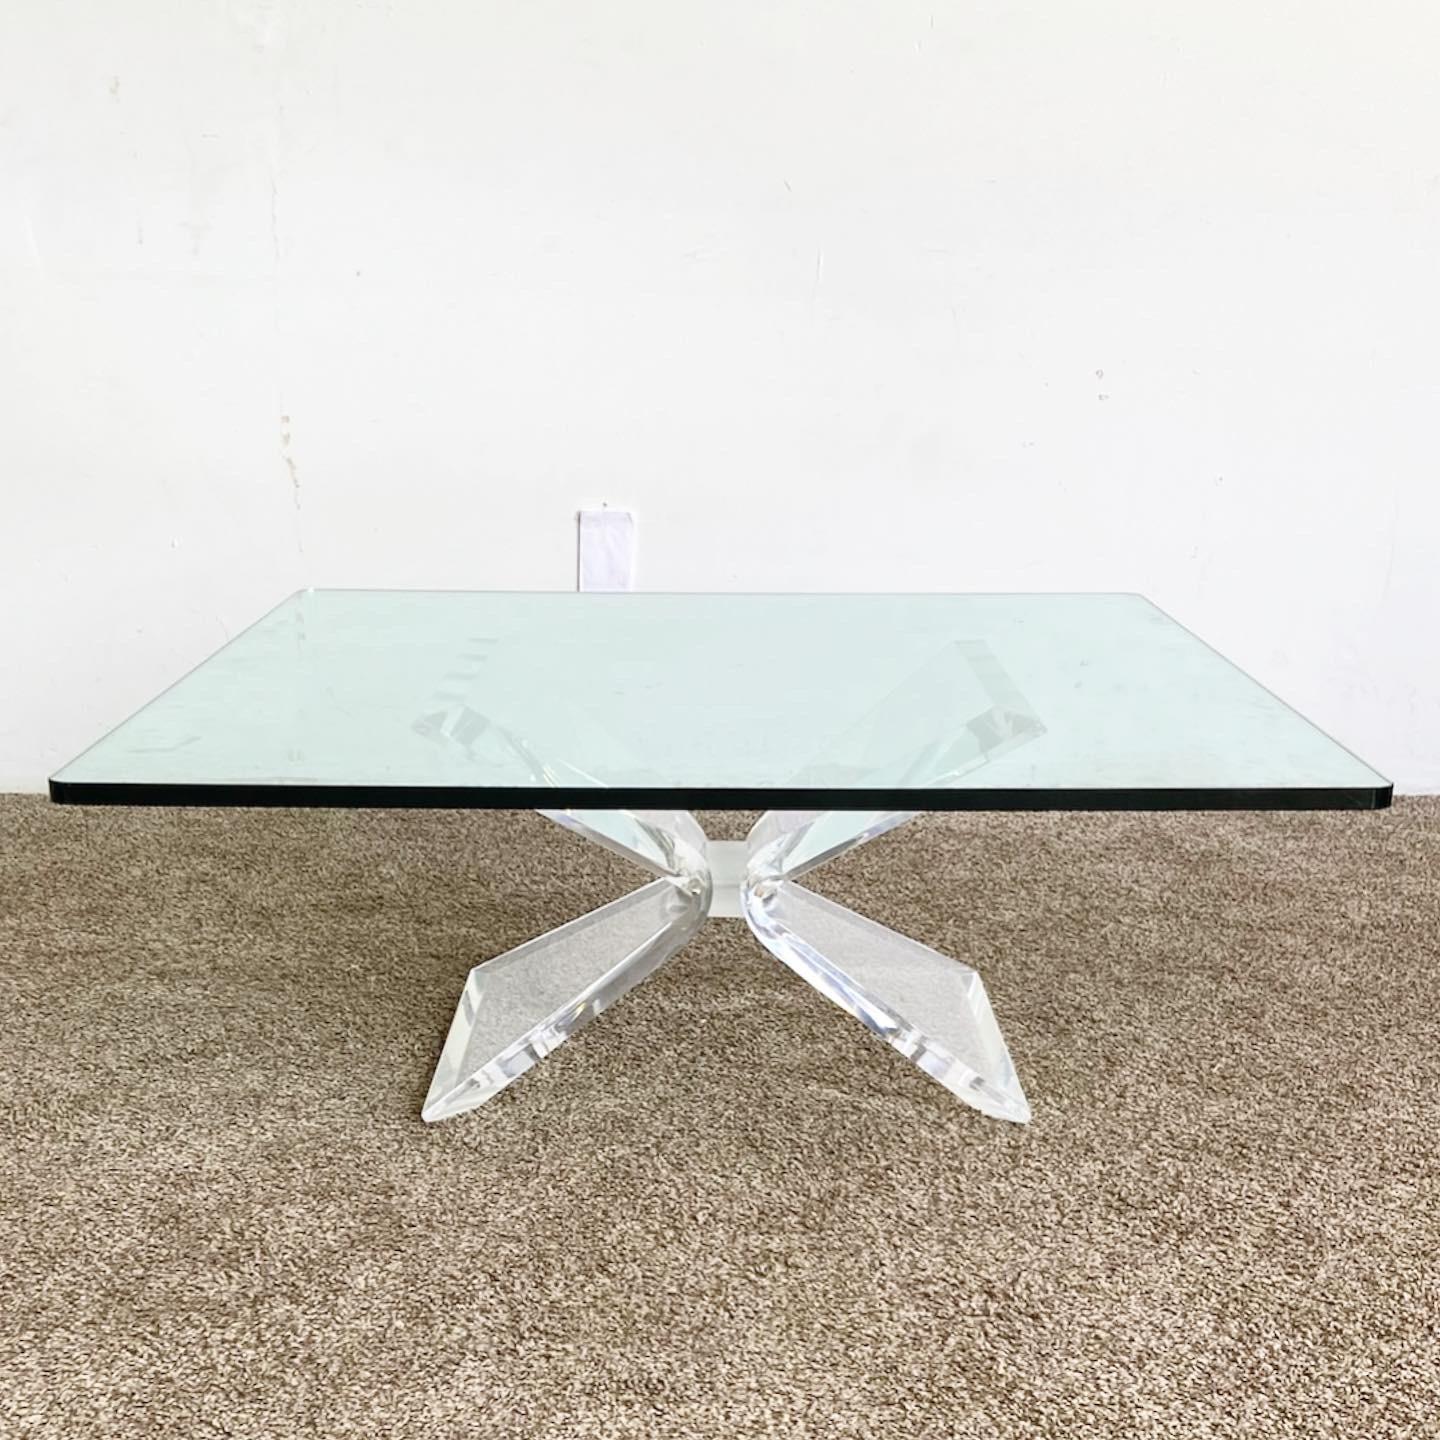 Introduce a splash of postmodern style to your living room with this Postmodern Lucite Glass Coffee Table. With its vintage square glass top and sculpted lucite base, this coffee table is an artful blend of form and function.
Some wear on the